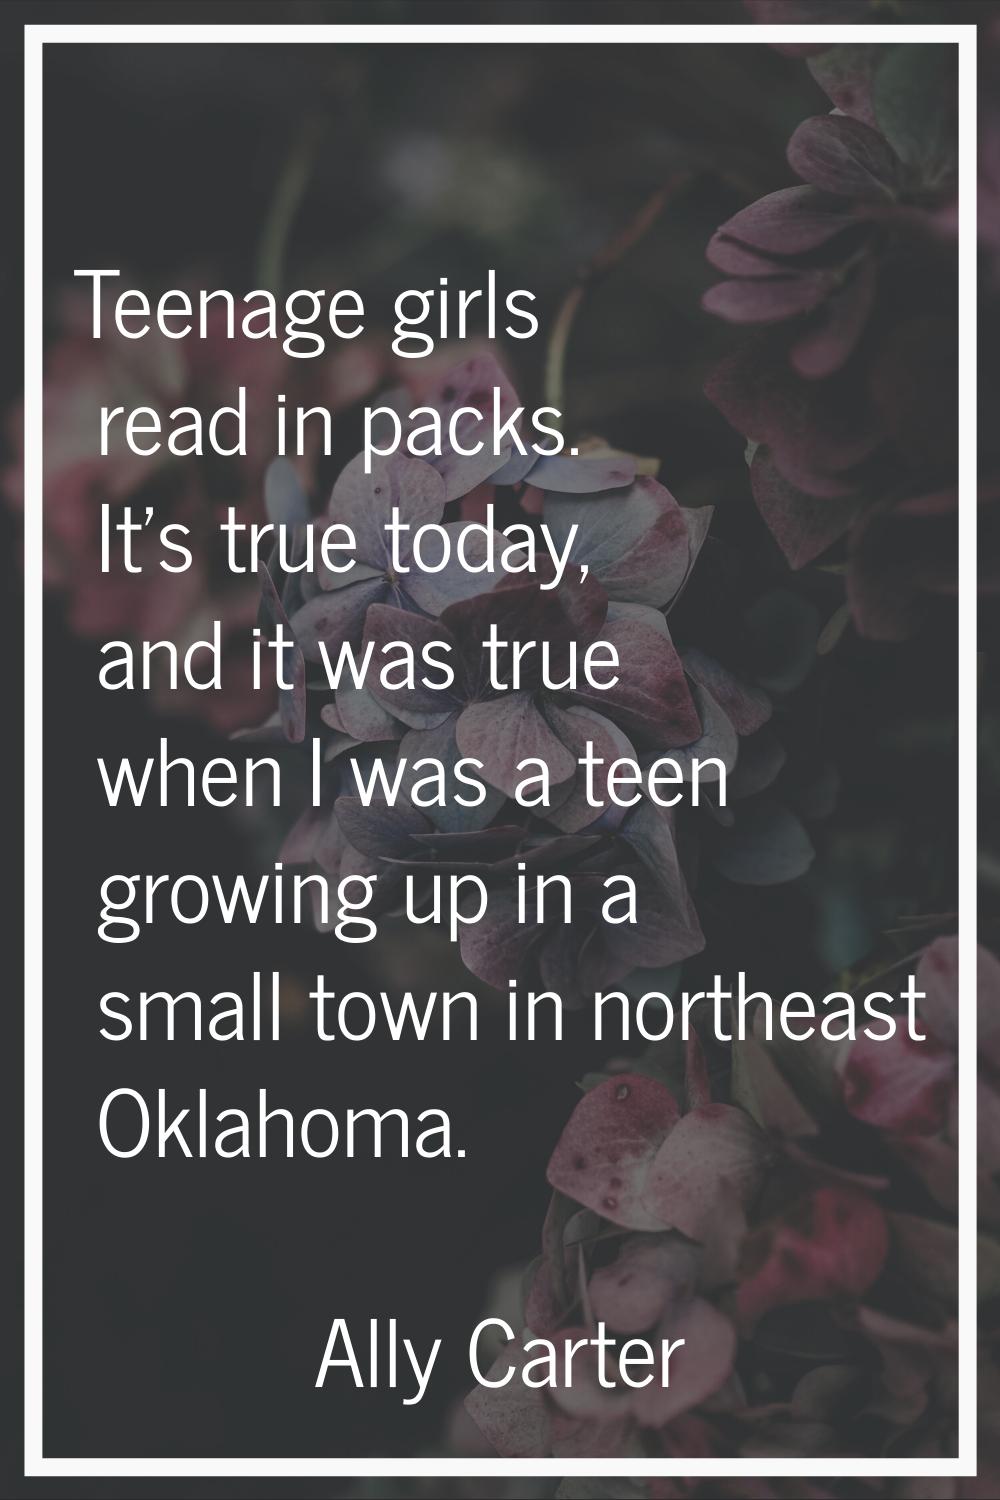 Teenage girls read in packs. It's true today, and it was true when I was a teen growing up in a sma